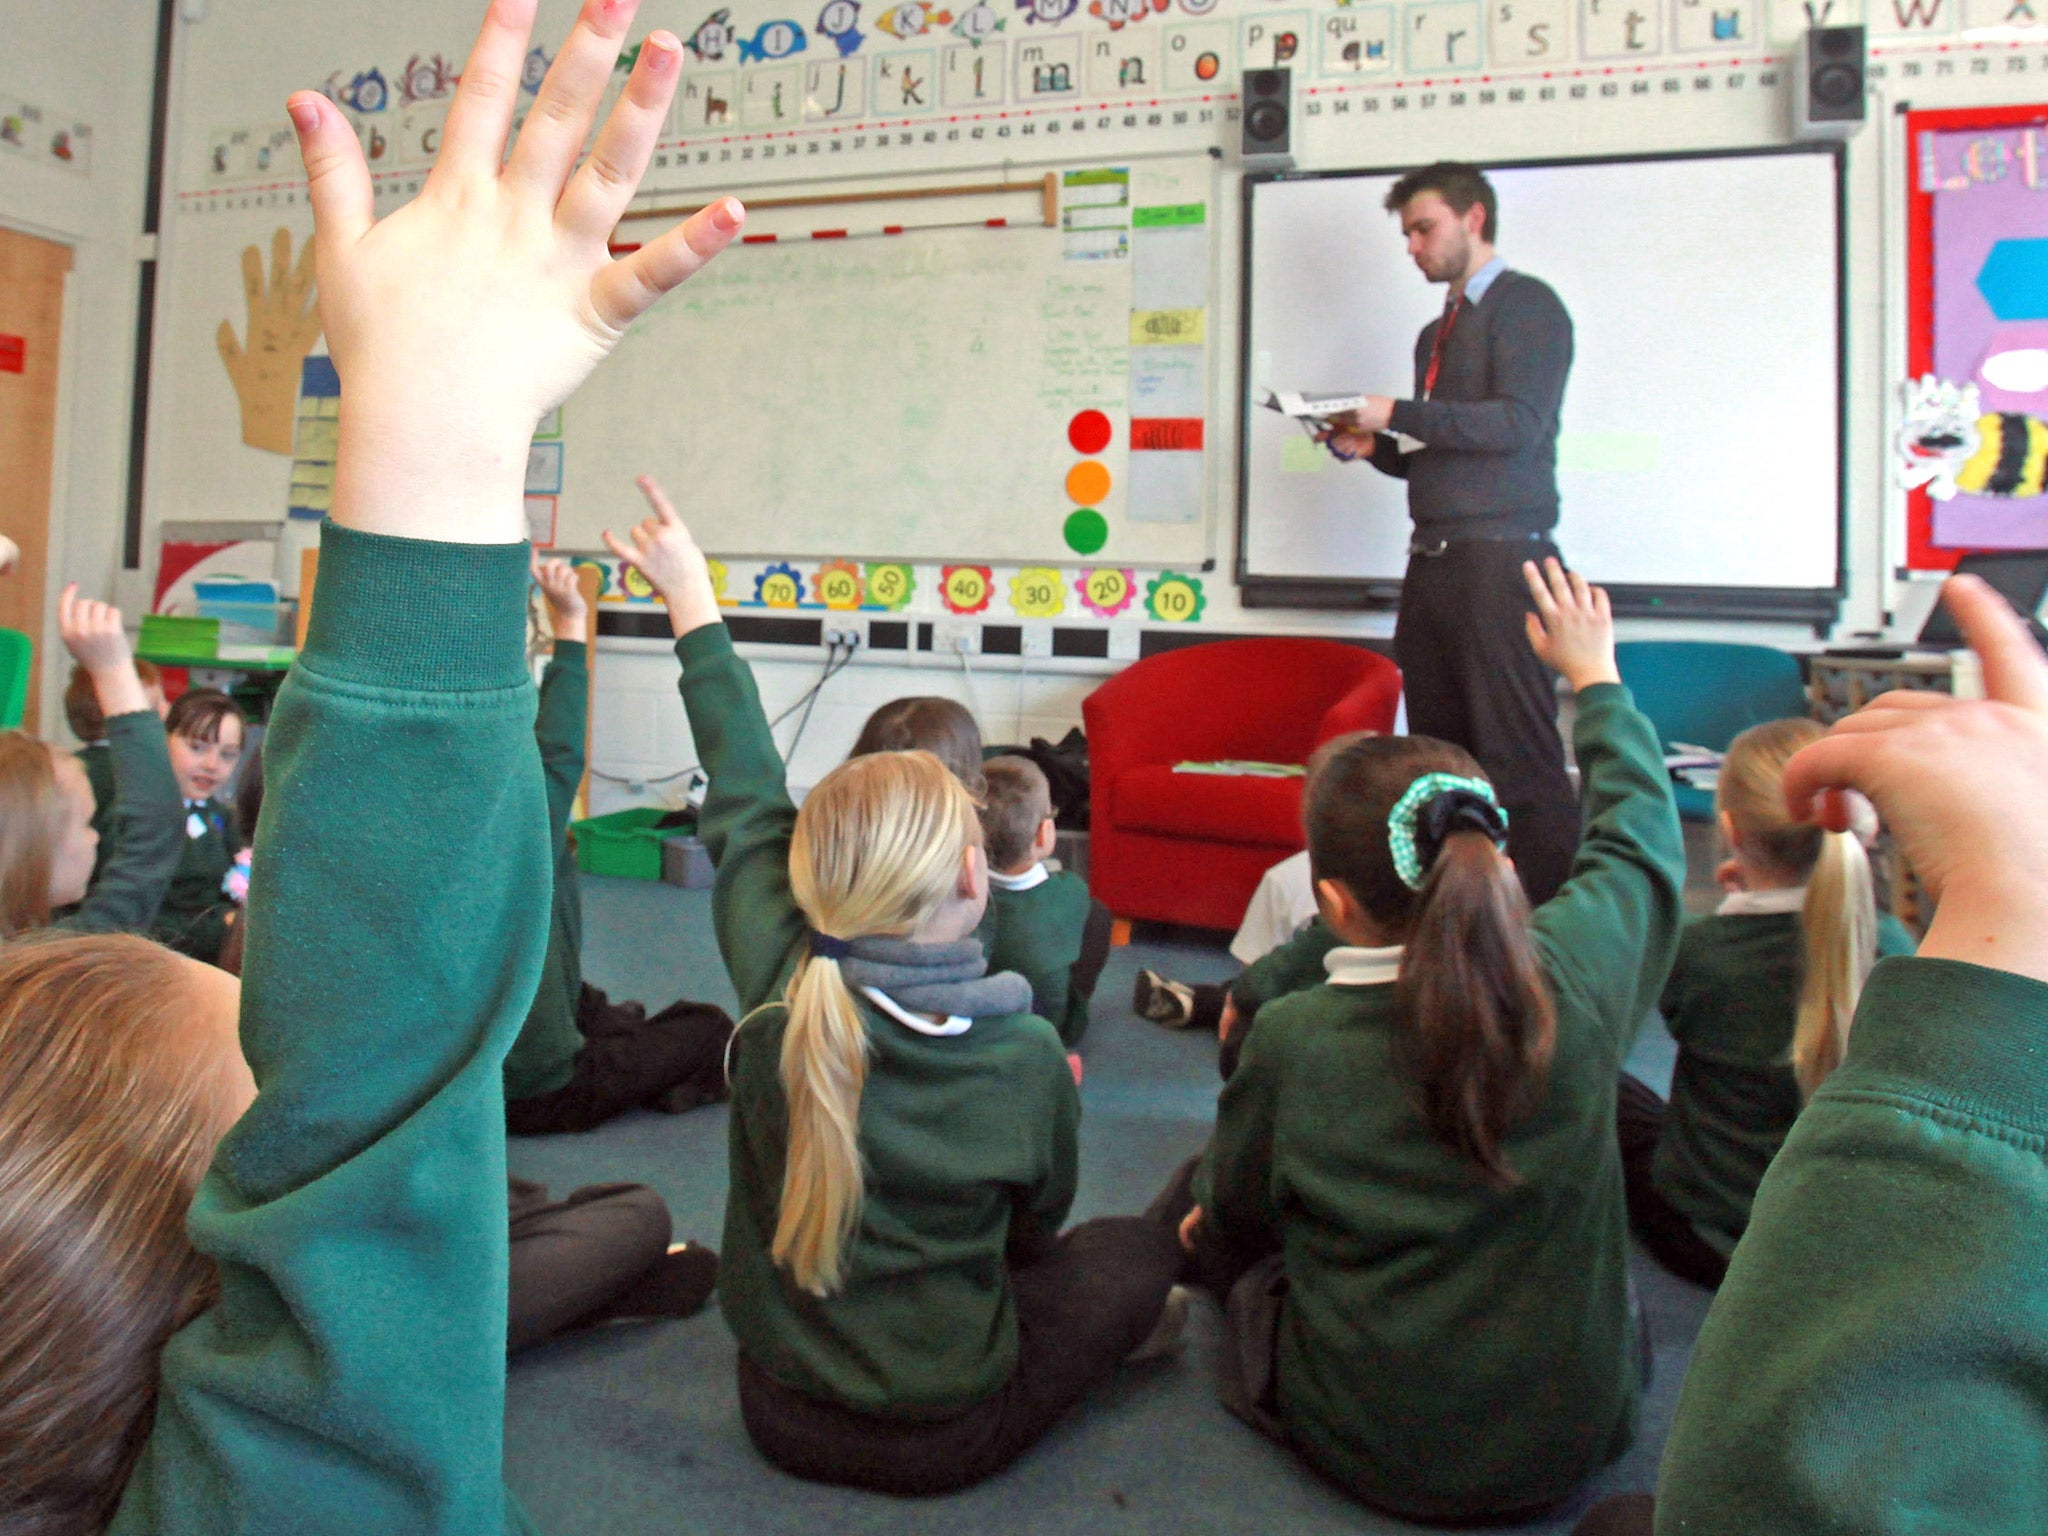 The number of pupils is expected to grow by 900,000 over the next decade